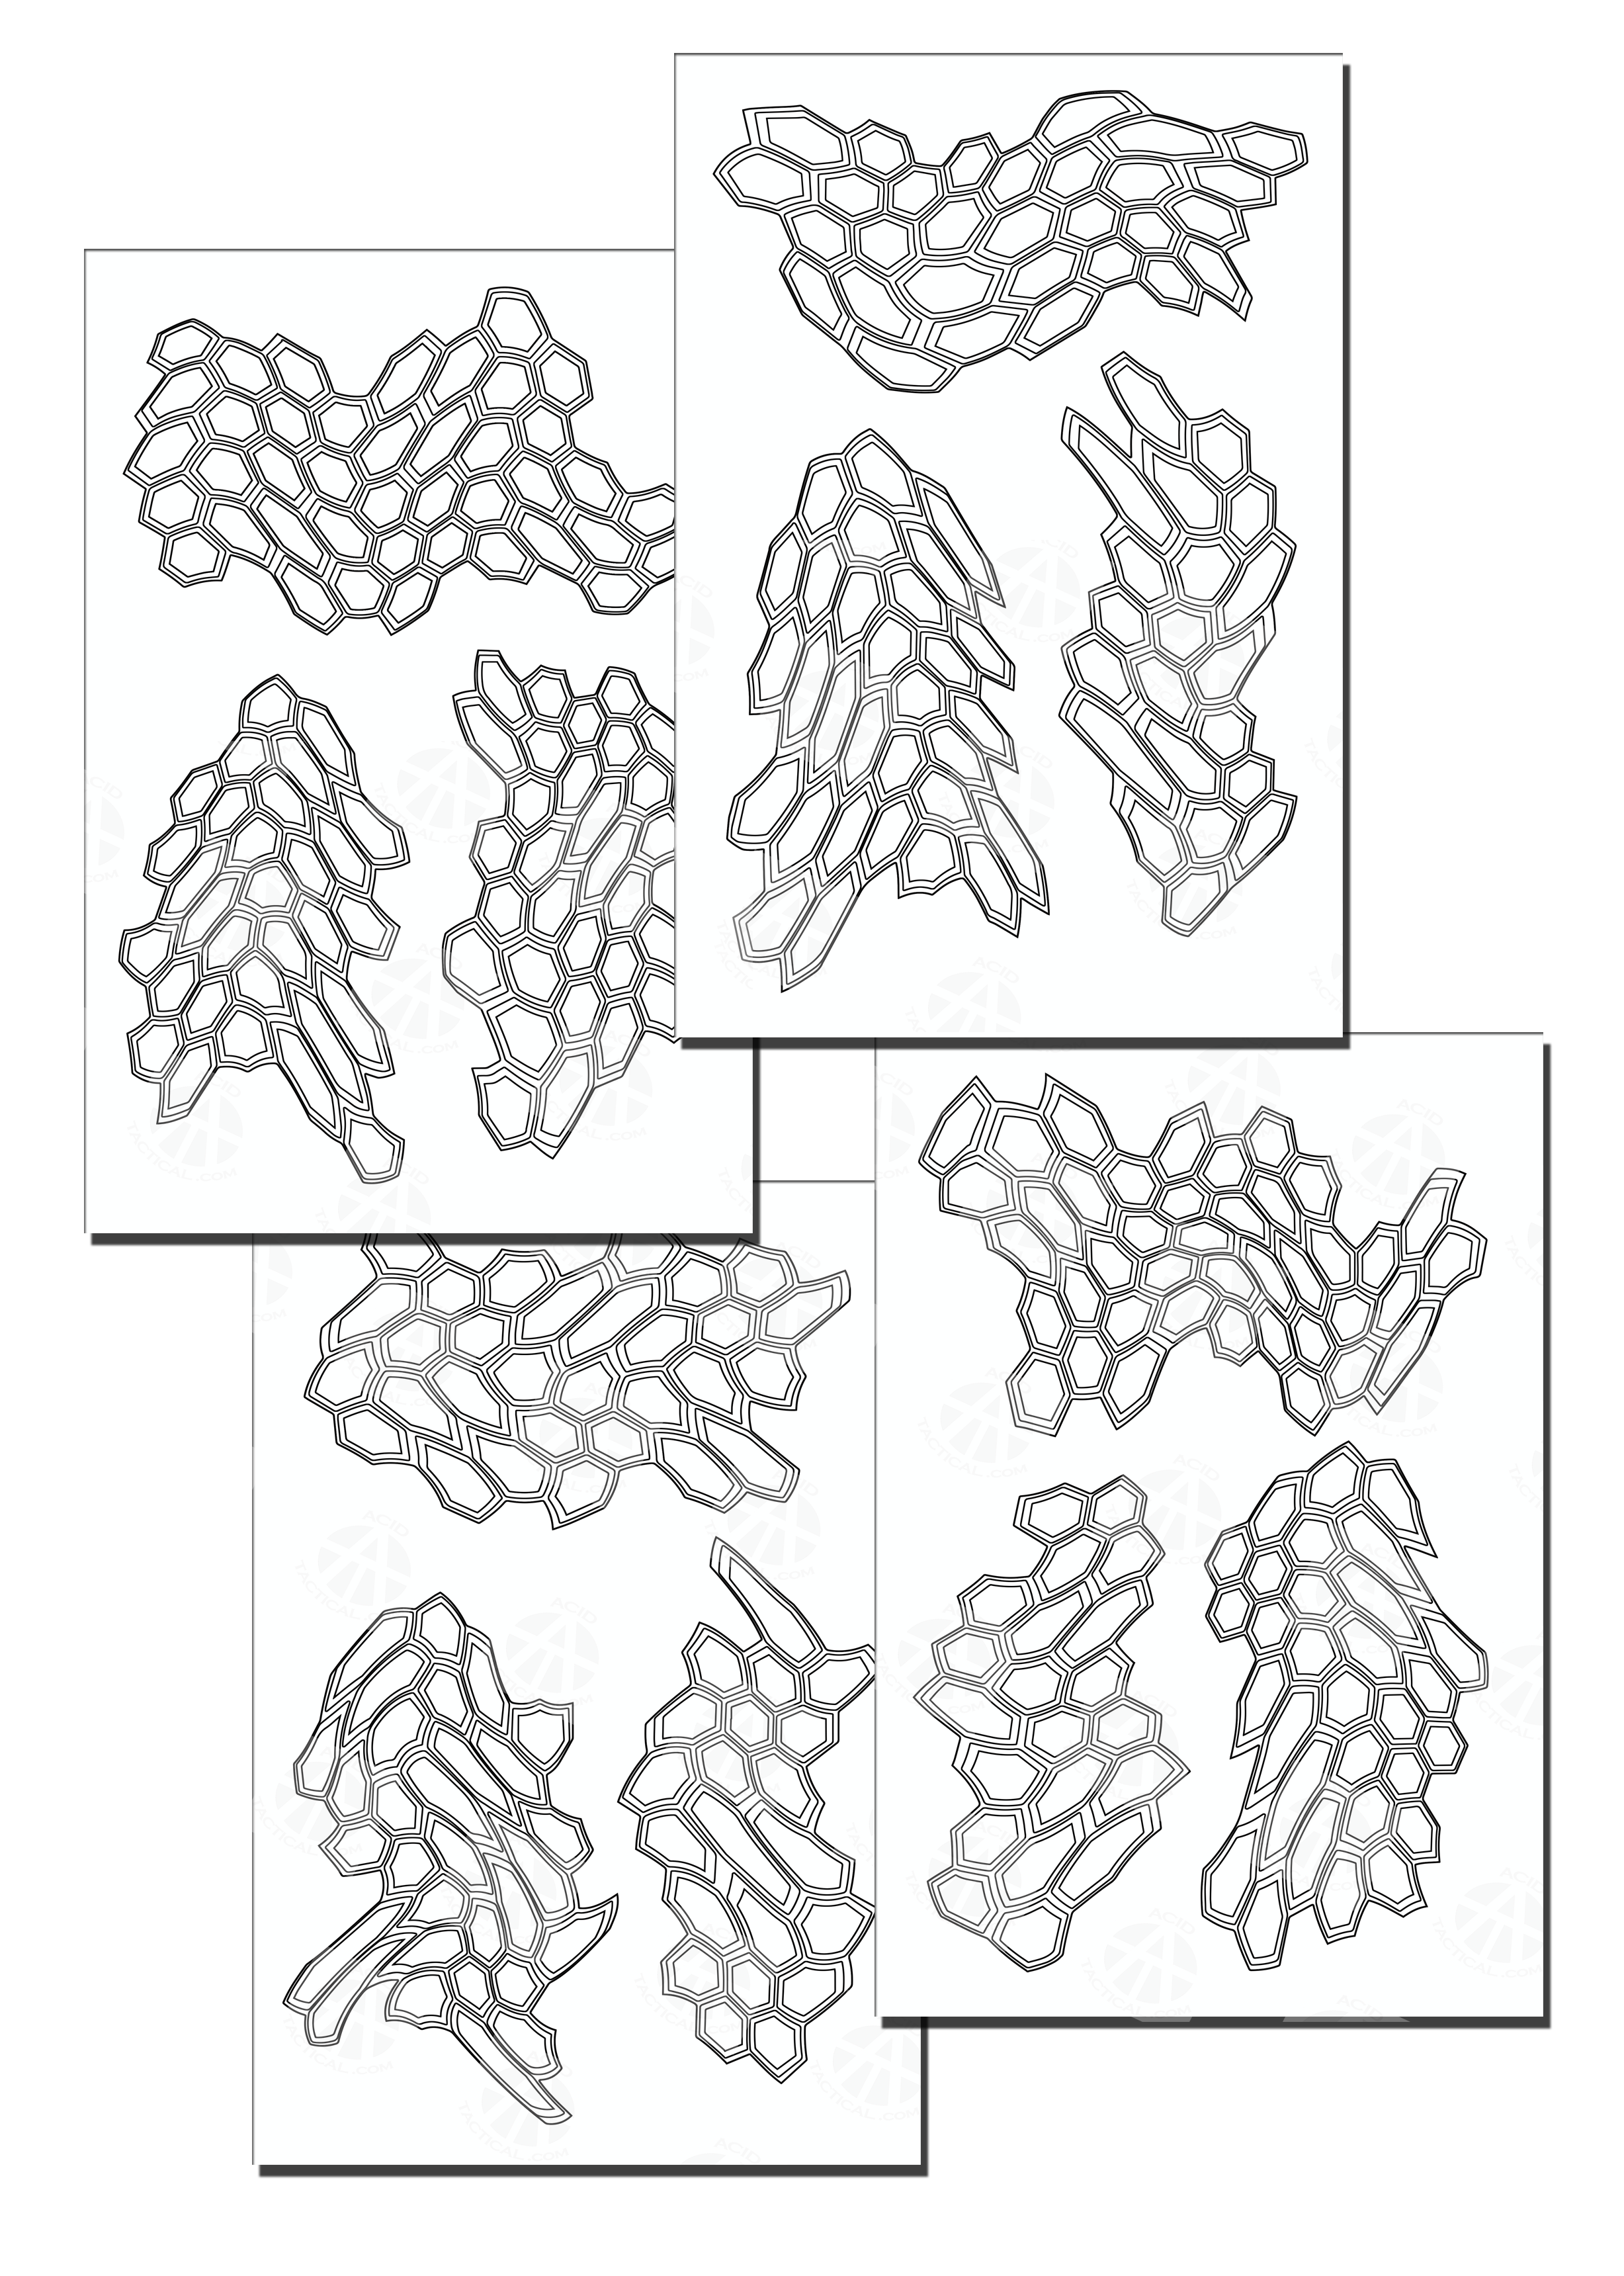 Assorted Camo Adhesive Easy Peel & Stick Stencils (8 Pack) - Camo Stencils  for your Camouflage Painting Needs